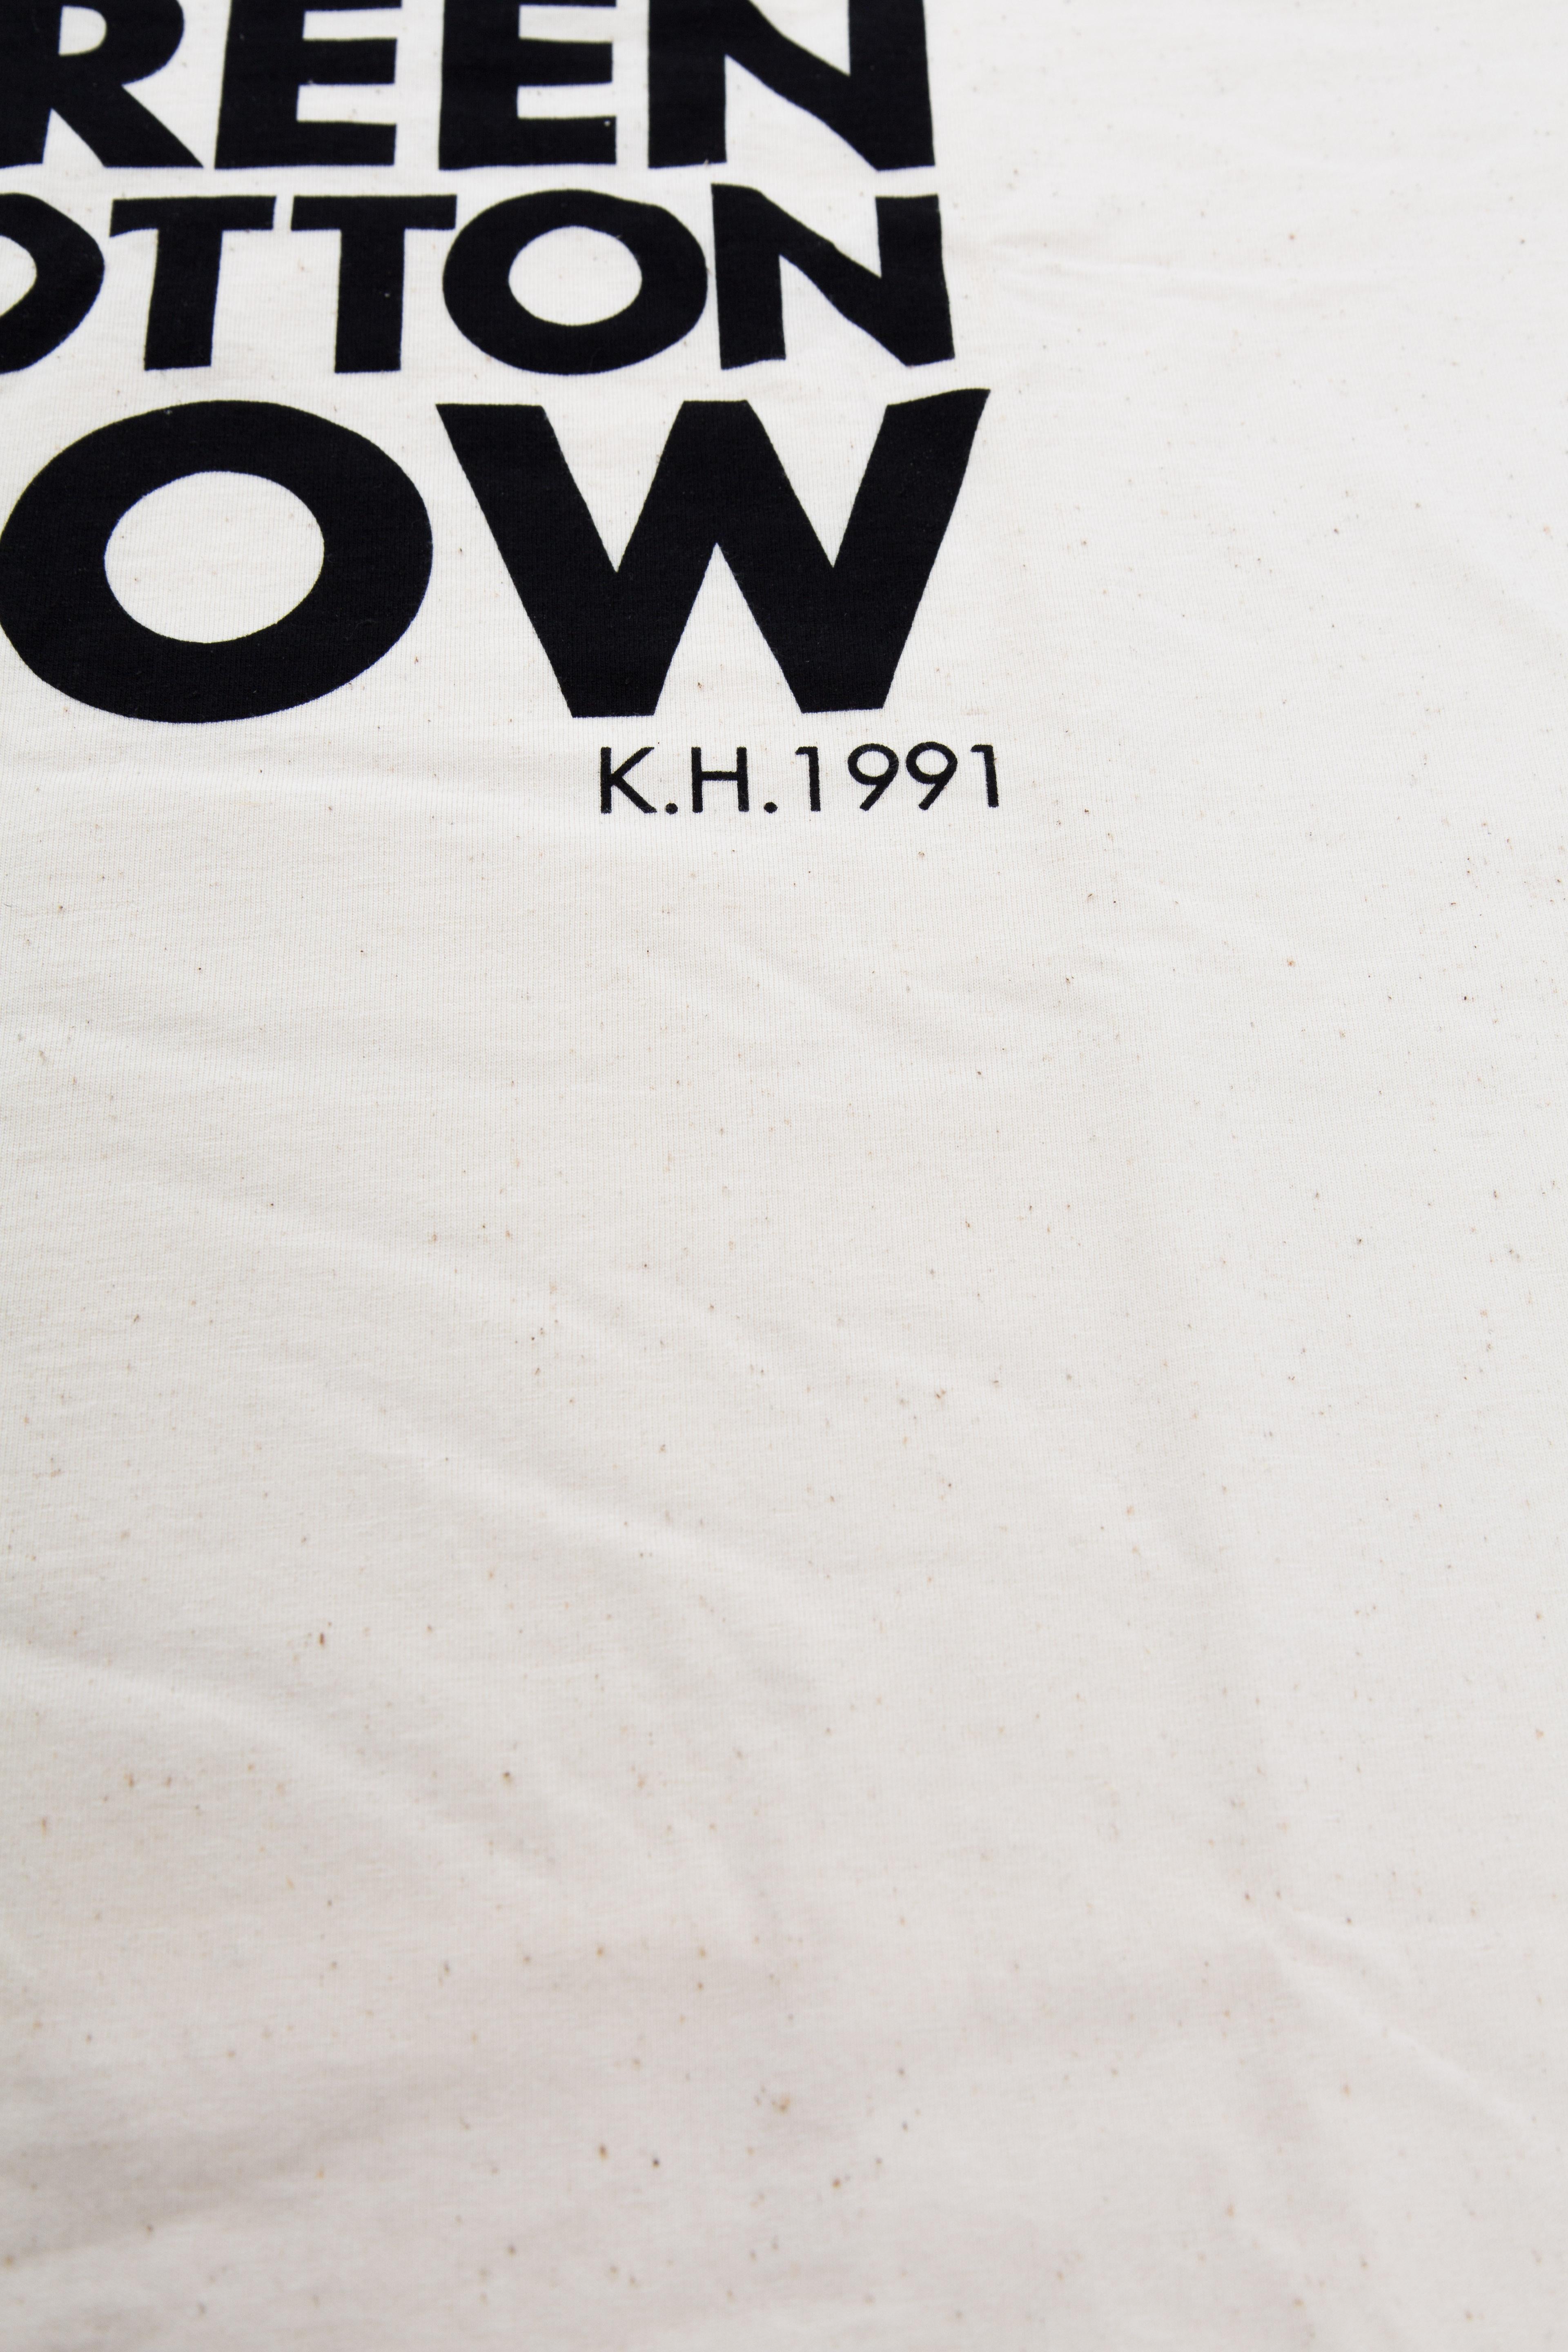 FIRST SERIES OF ORGANIC COTTON T-SHIRTS IN THE WORLD. KATHARINE HAMNETT DESIGNED THE FIRST ORGANIC T-shirts in the world in 1991. These T-shirts where the first organic T-shirts from the ecological agriculture. The organic cotton has been harvest in